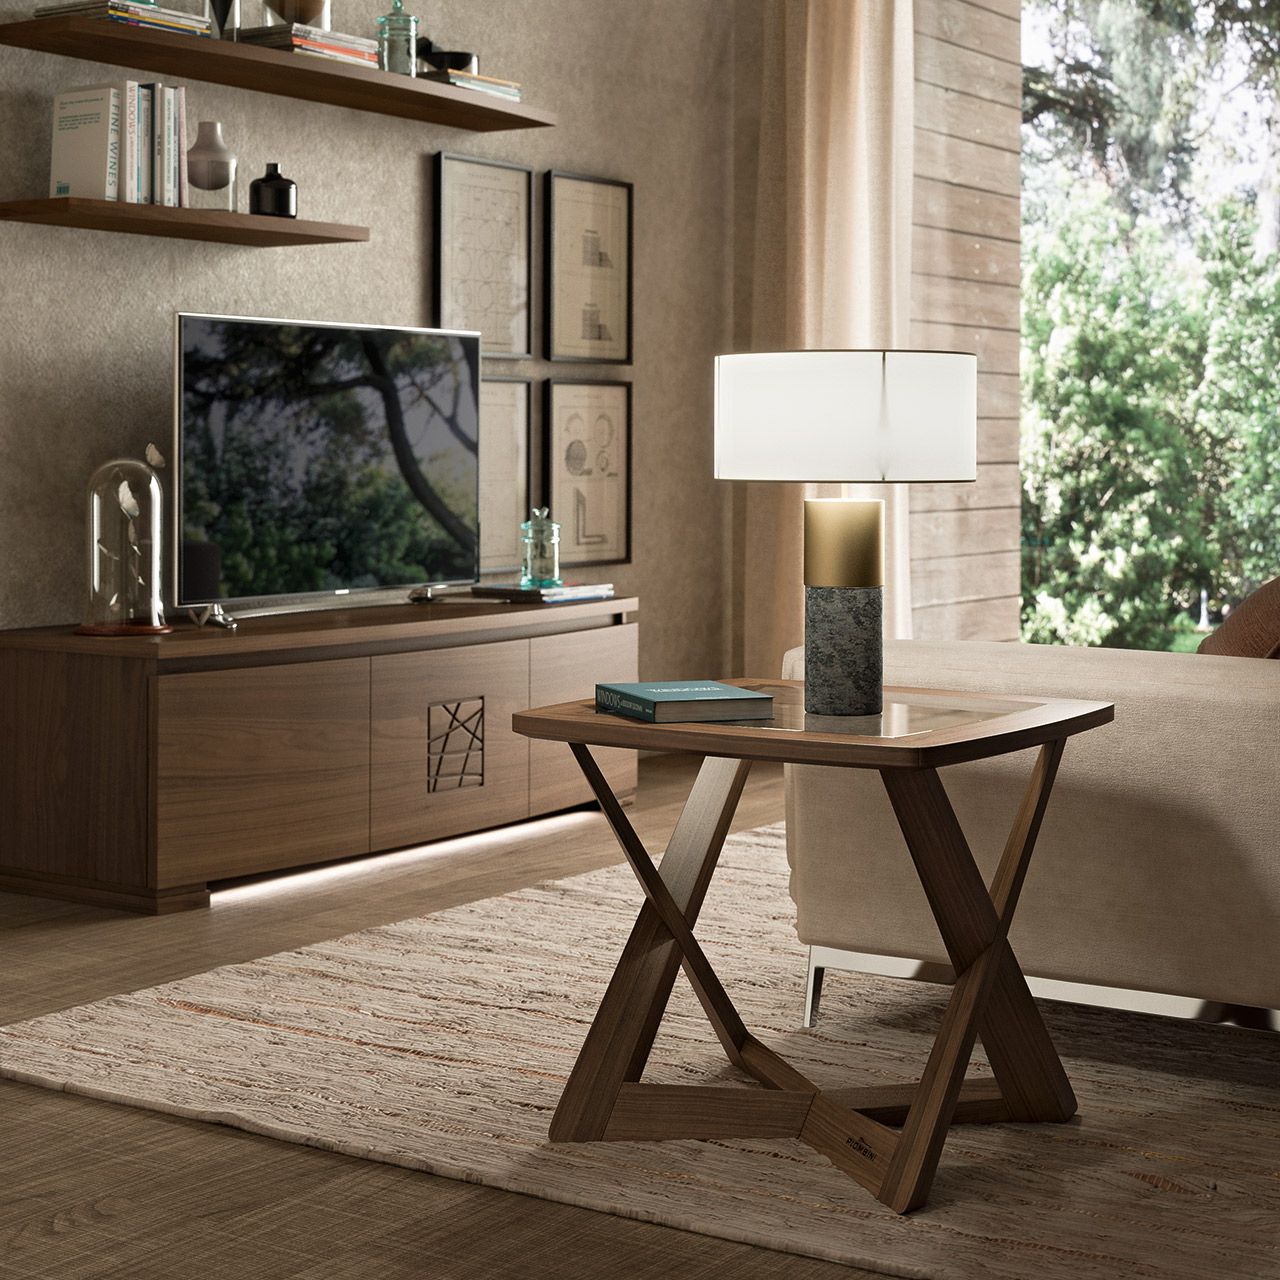 Modern Square Walnut Coffee Table With Tempered Glass Top – Mobili Piombini Inside Tempered Glass Top Coffee Tables (View 8 of 15)